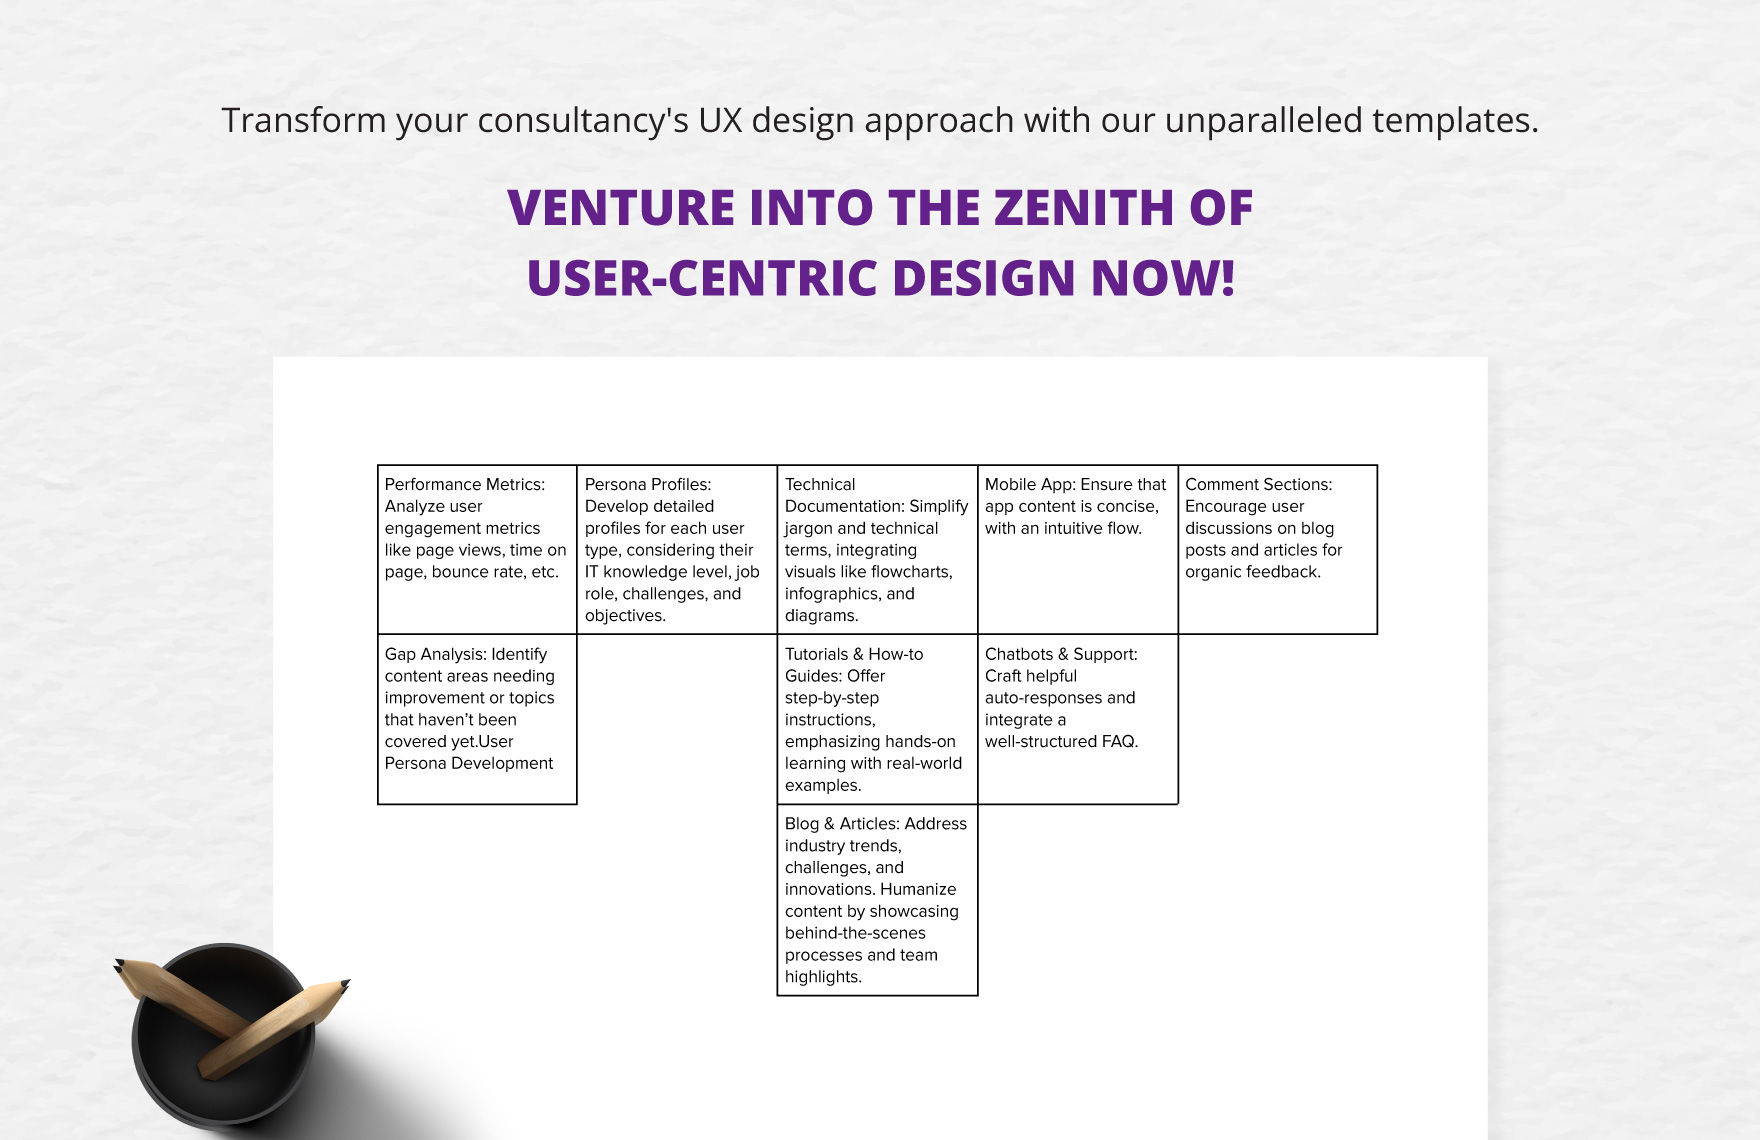 IT UX Content Strategy Template